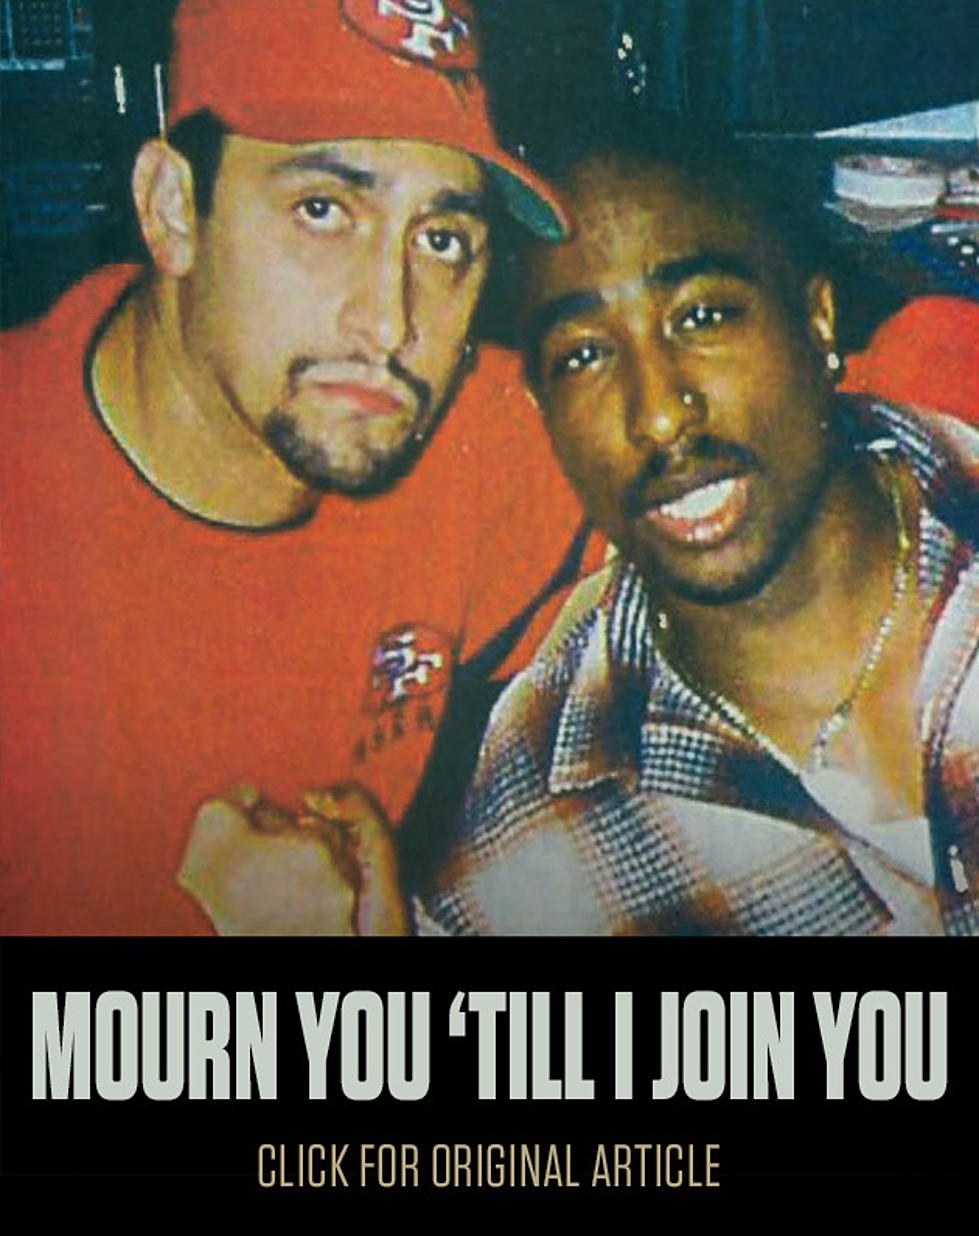 Tupac's Favorite Producer Johnny J's Troubled Life and Tragic Death (XXL September 2011 Issue)